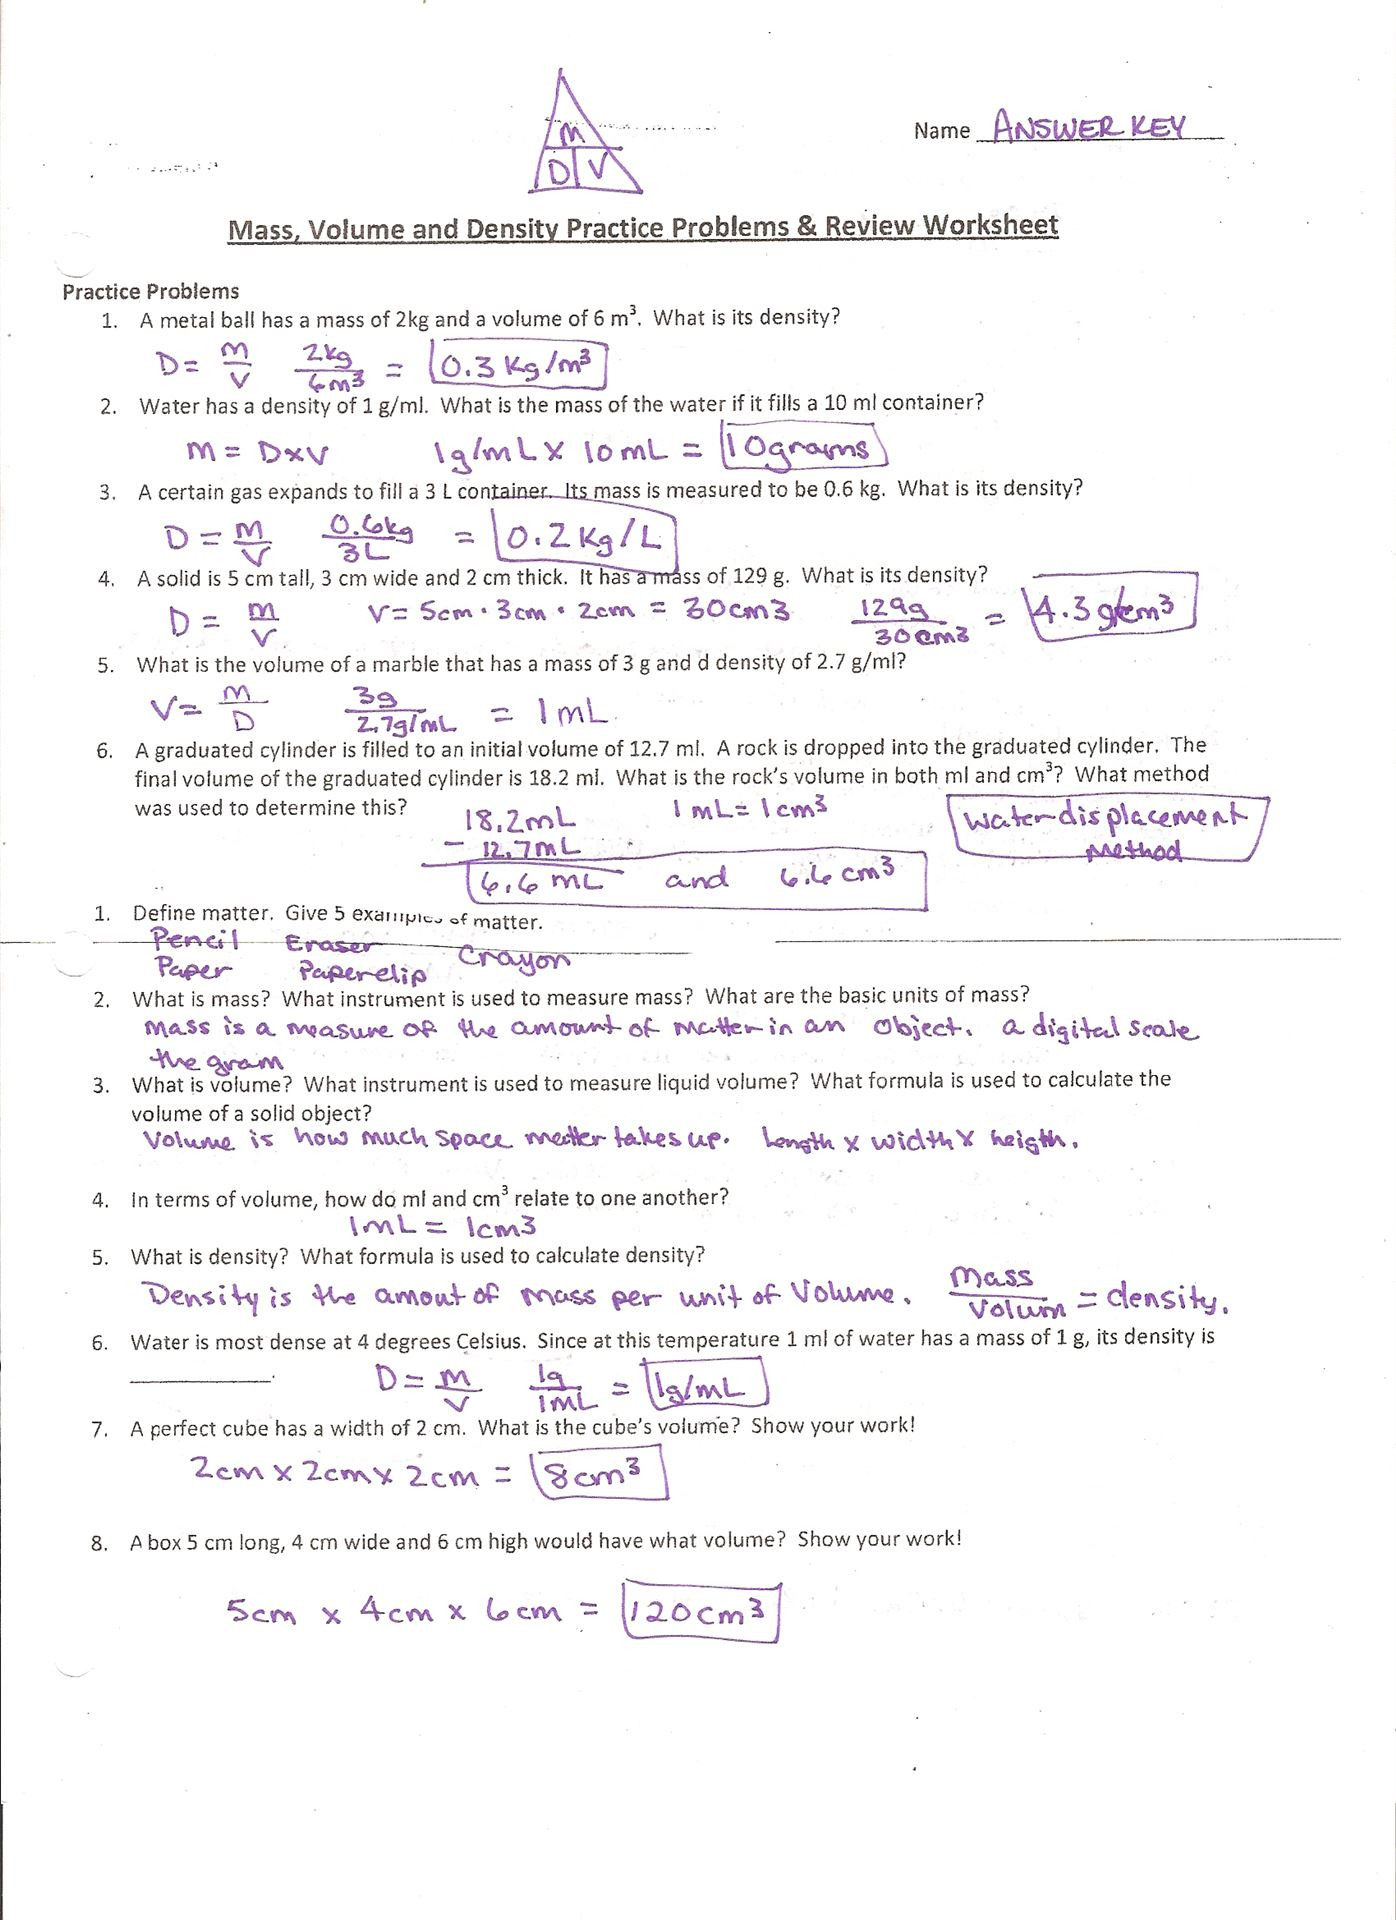 Molarity Practice Worksheet Answer Calculating Percent by Mass Volume Chem Worksheet 15 2